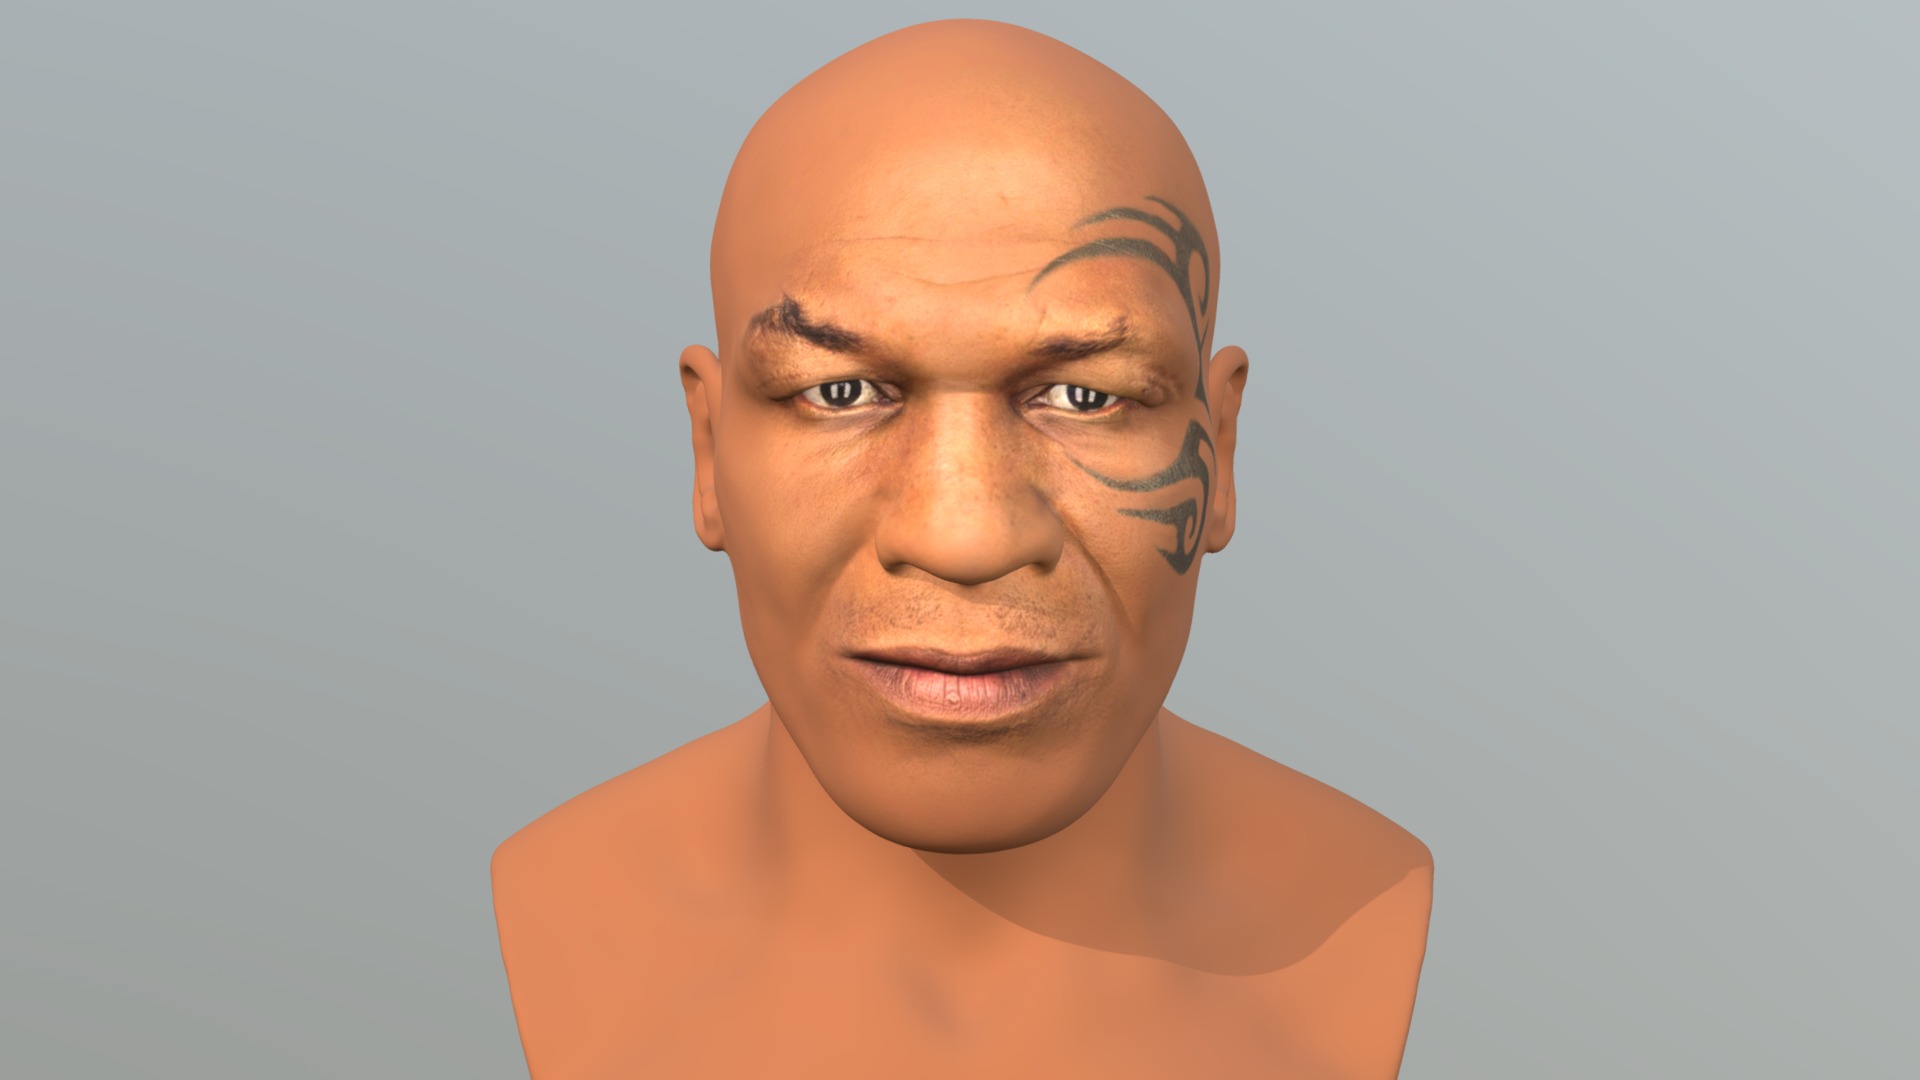 3D model Mike Tyson bust for full color 3D printing - This is a 3D model of the Mike Tyson bust for full color 3D printing. The 3D model is about a man with a large forehead.